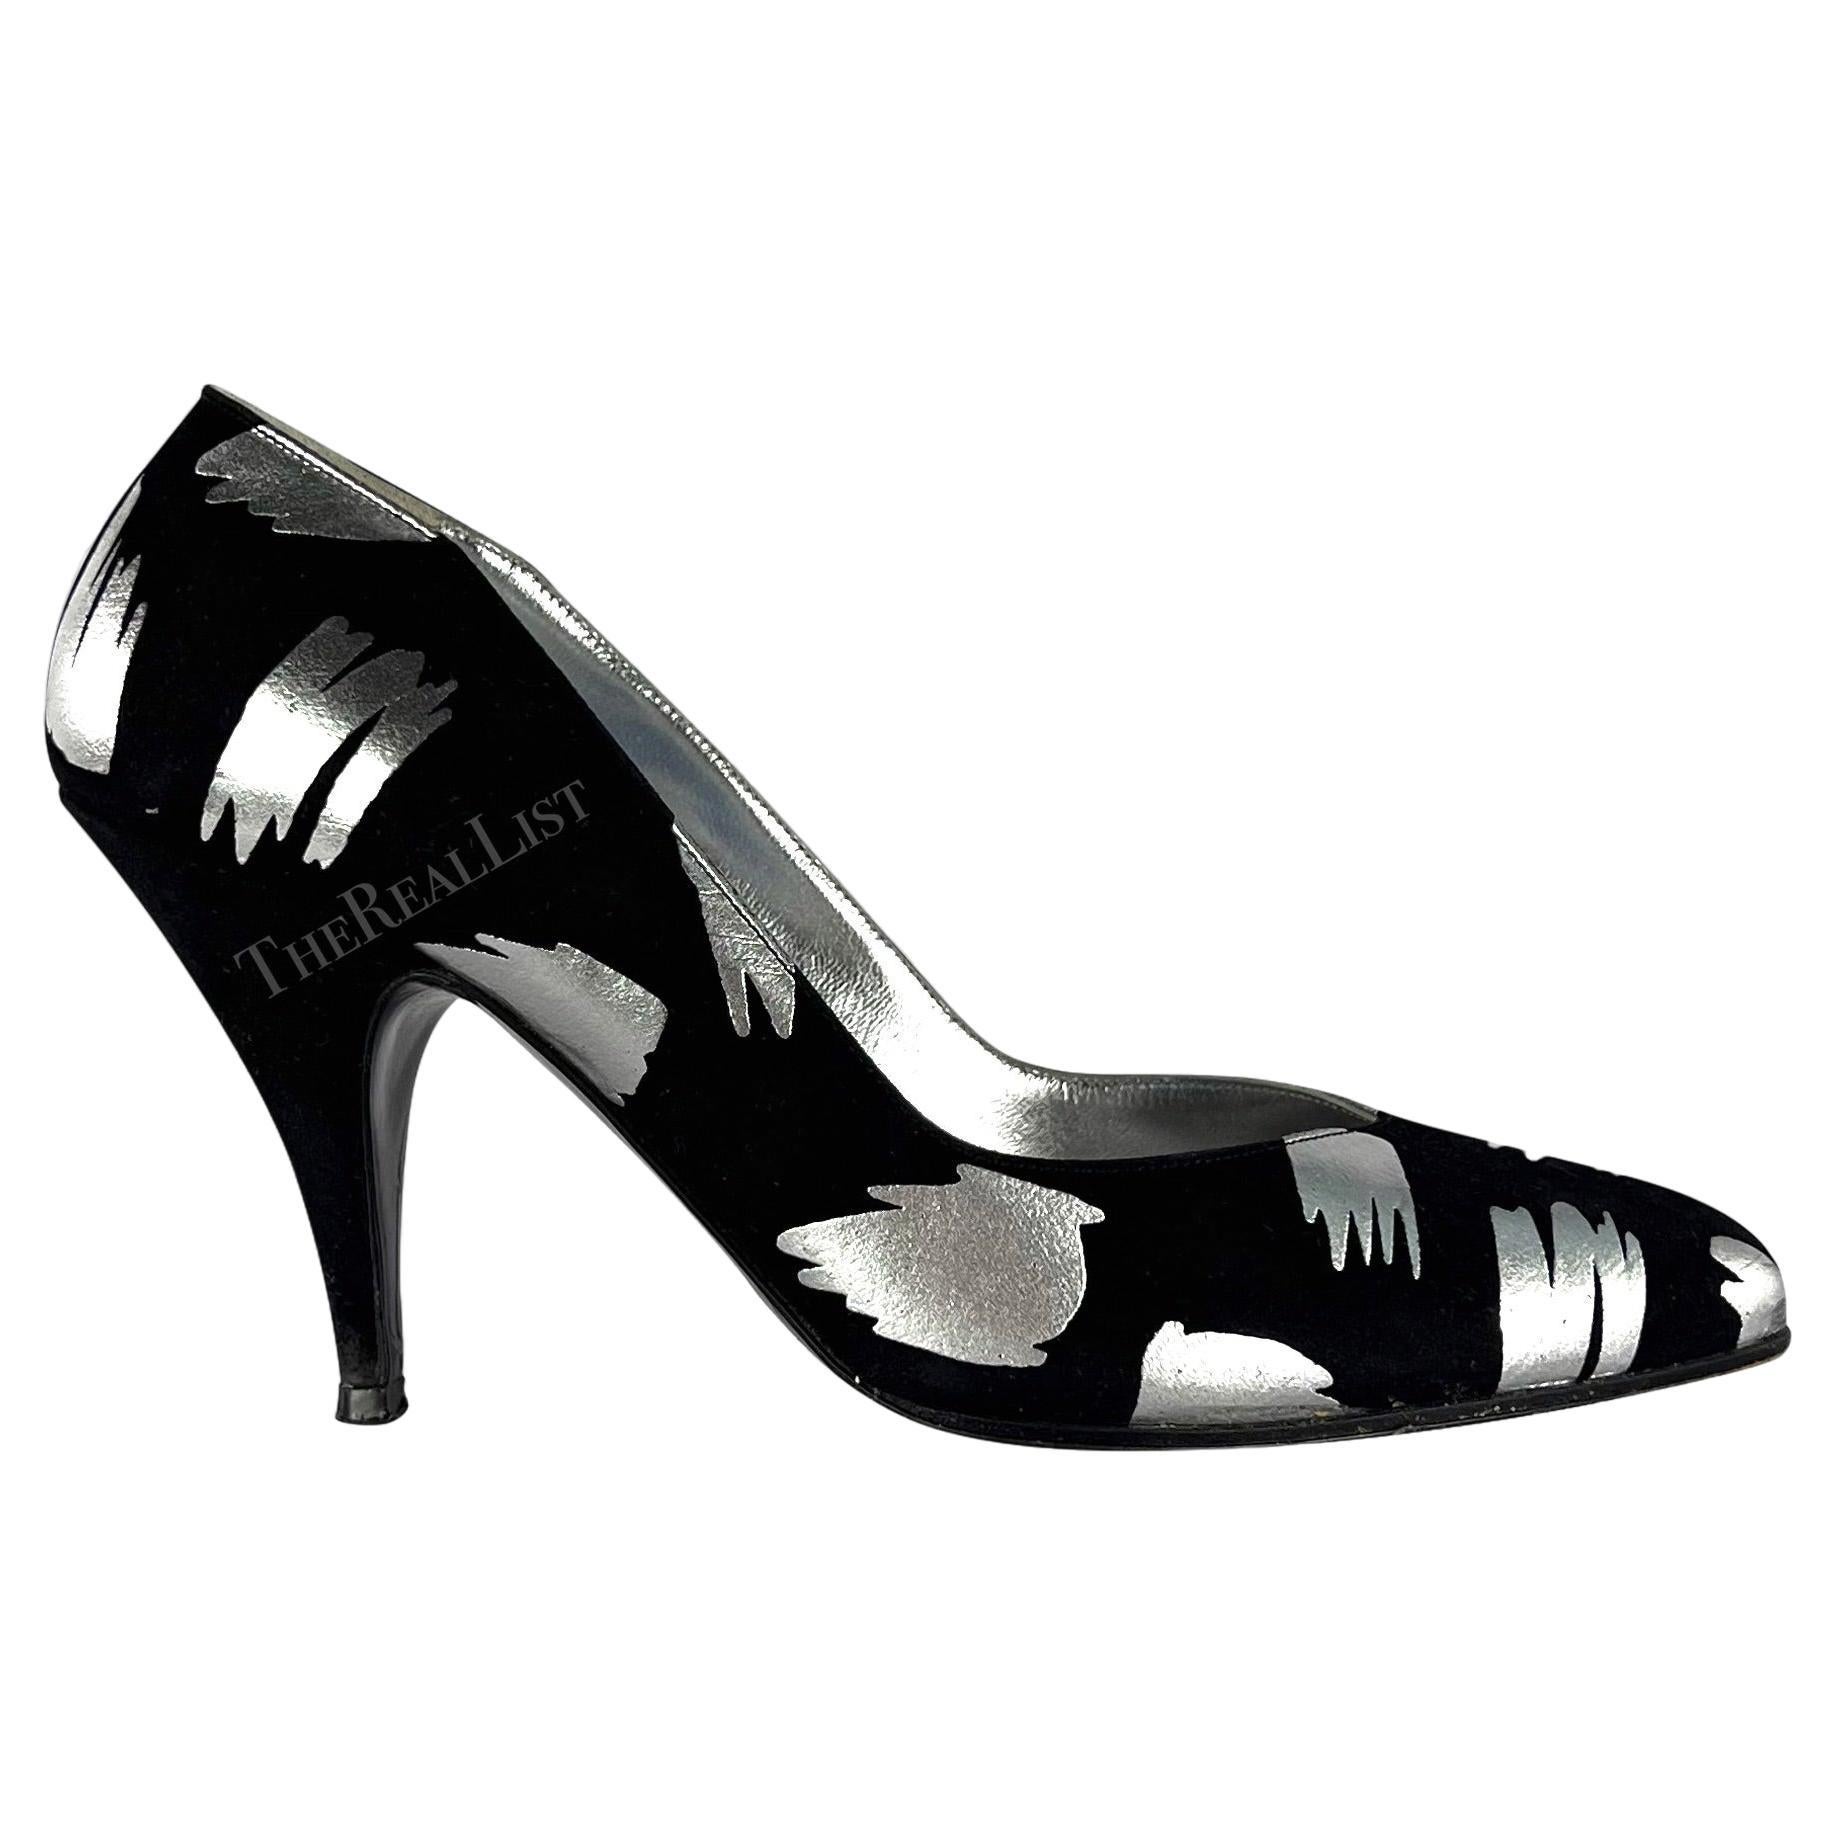 1980s Thierry Mugler Black Suede Abstract Silver Metallic Pumps Size 5.5B  For Sale